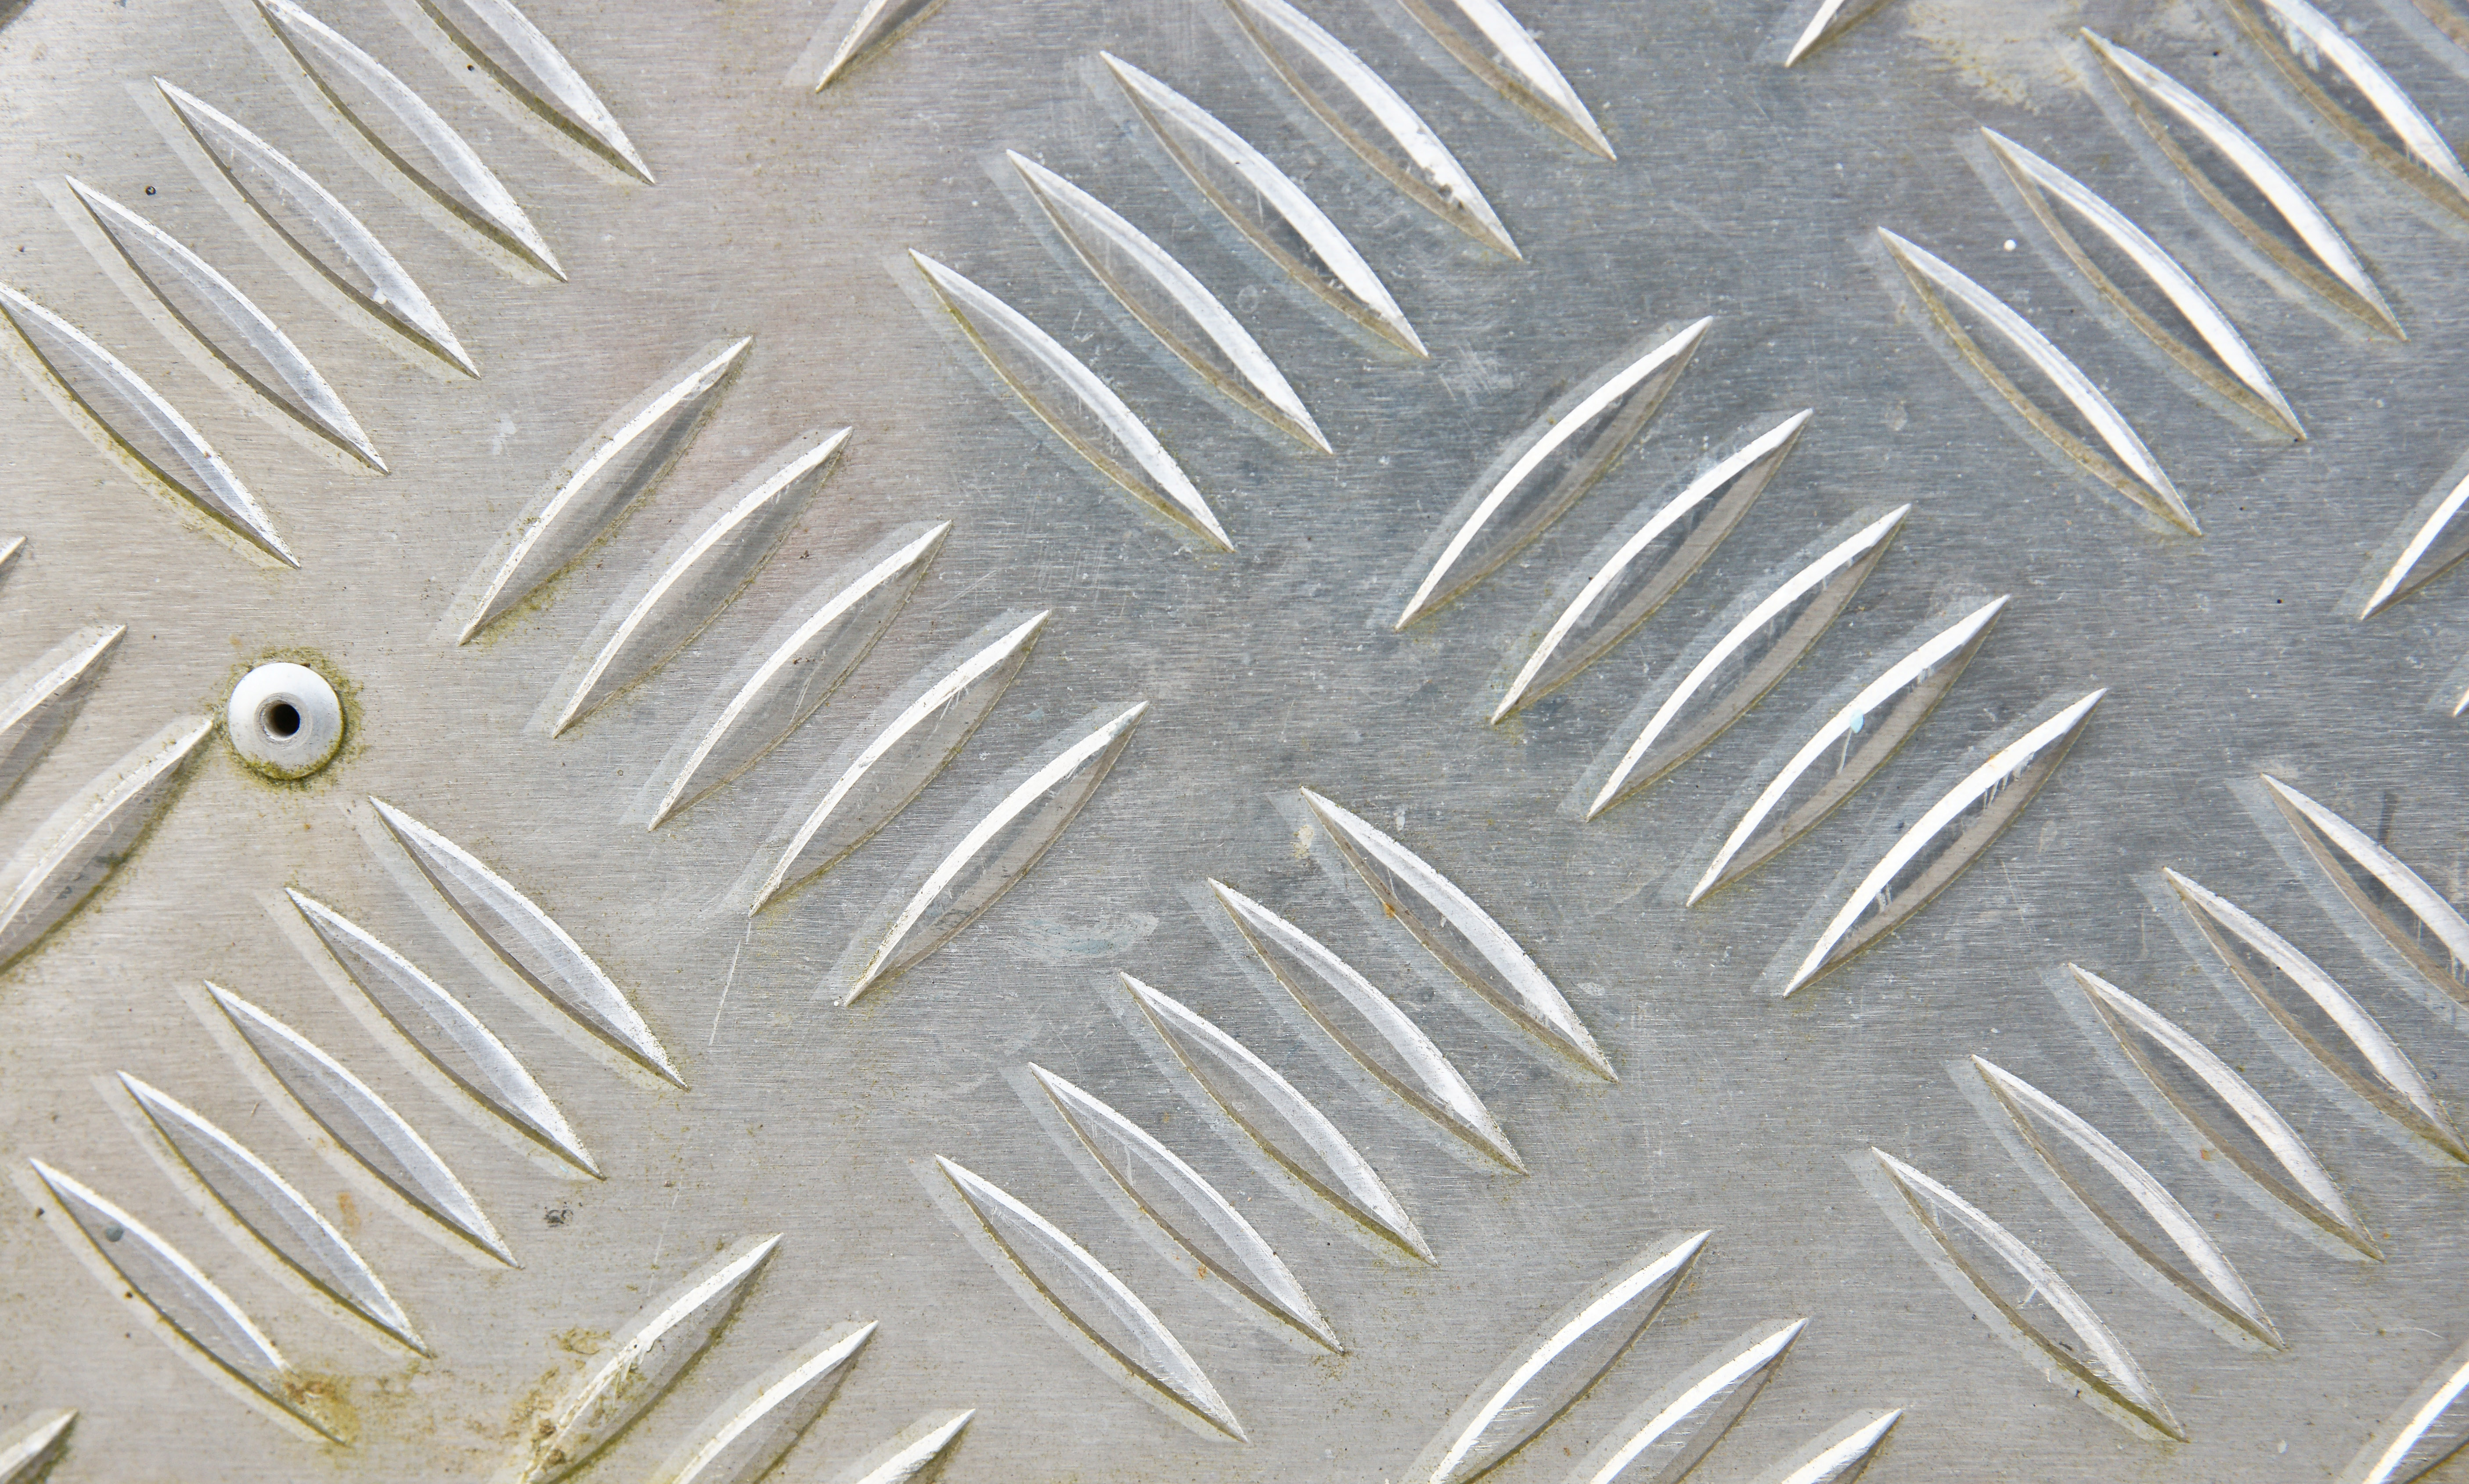 Textures Background Photo Of Diamond Or Tread Plate Metal